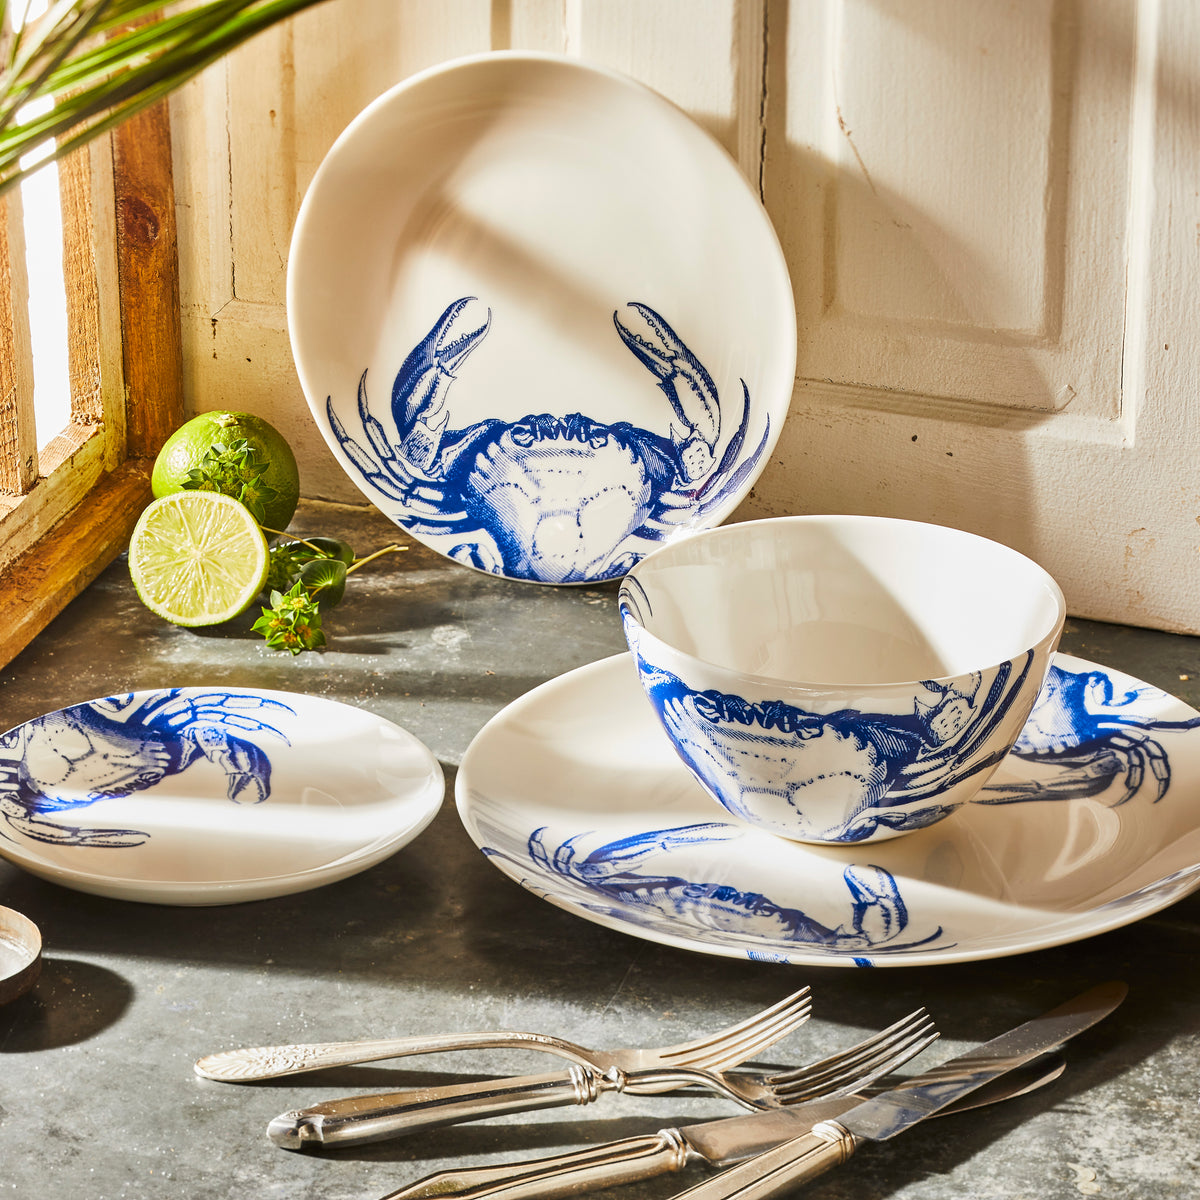 A Crab Blue Canapé Plates dinnerware set on a table, perfect for a coastal style setting.